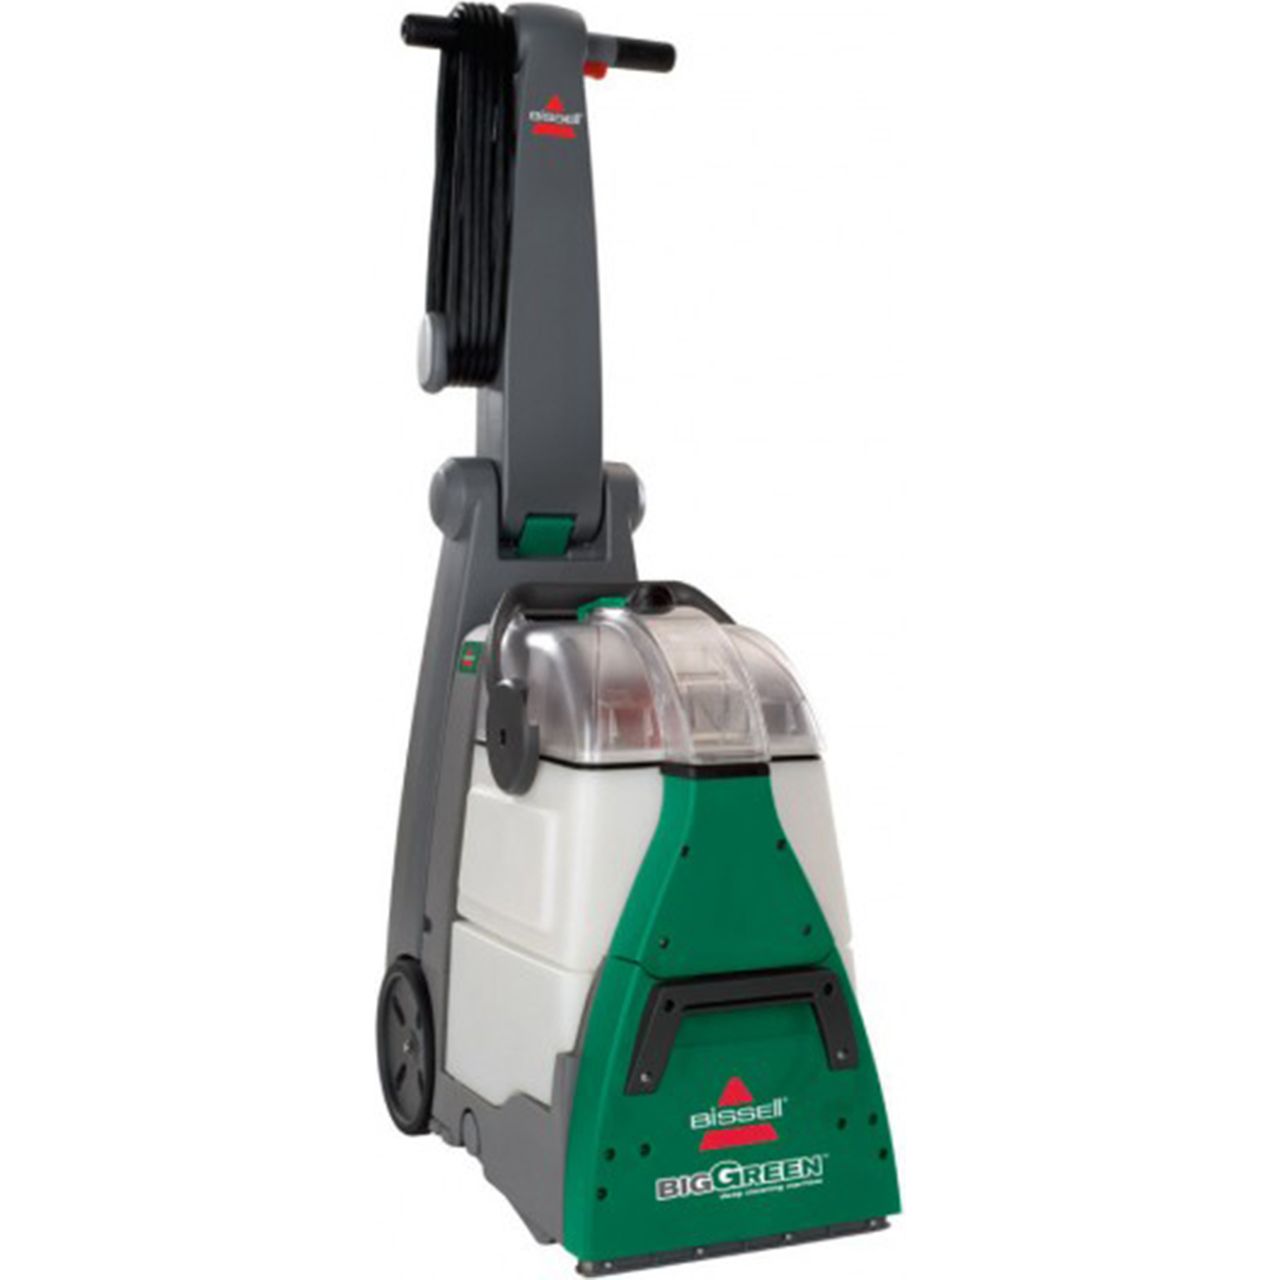 Bissell Big Green™ Deep Cleaning Machine 48F3ER Carpet Cleaner Reviews ...